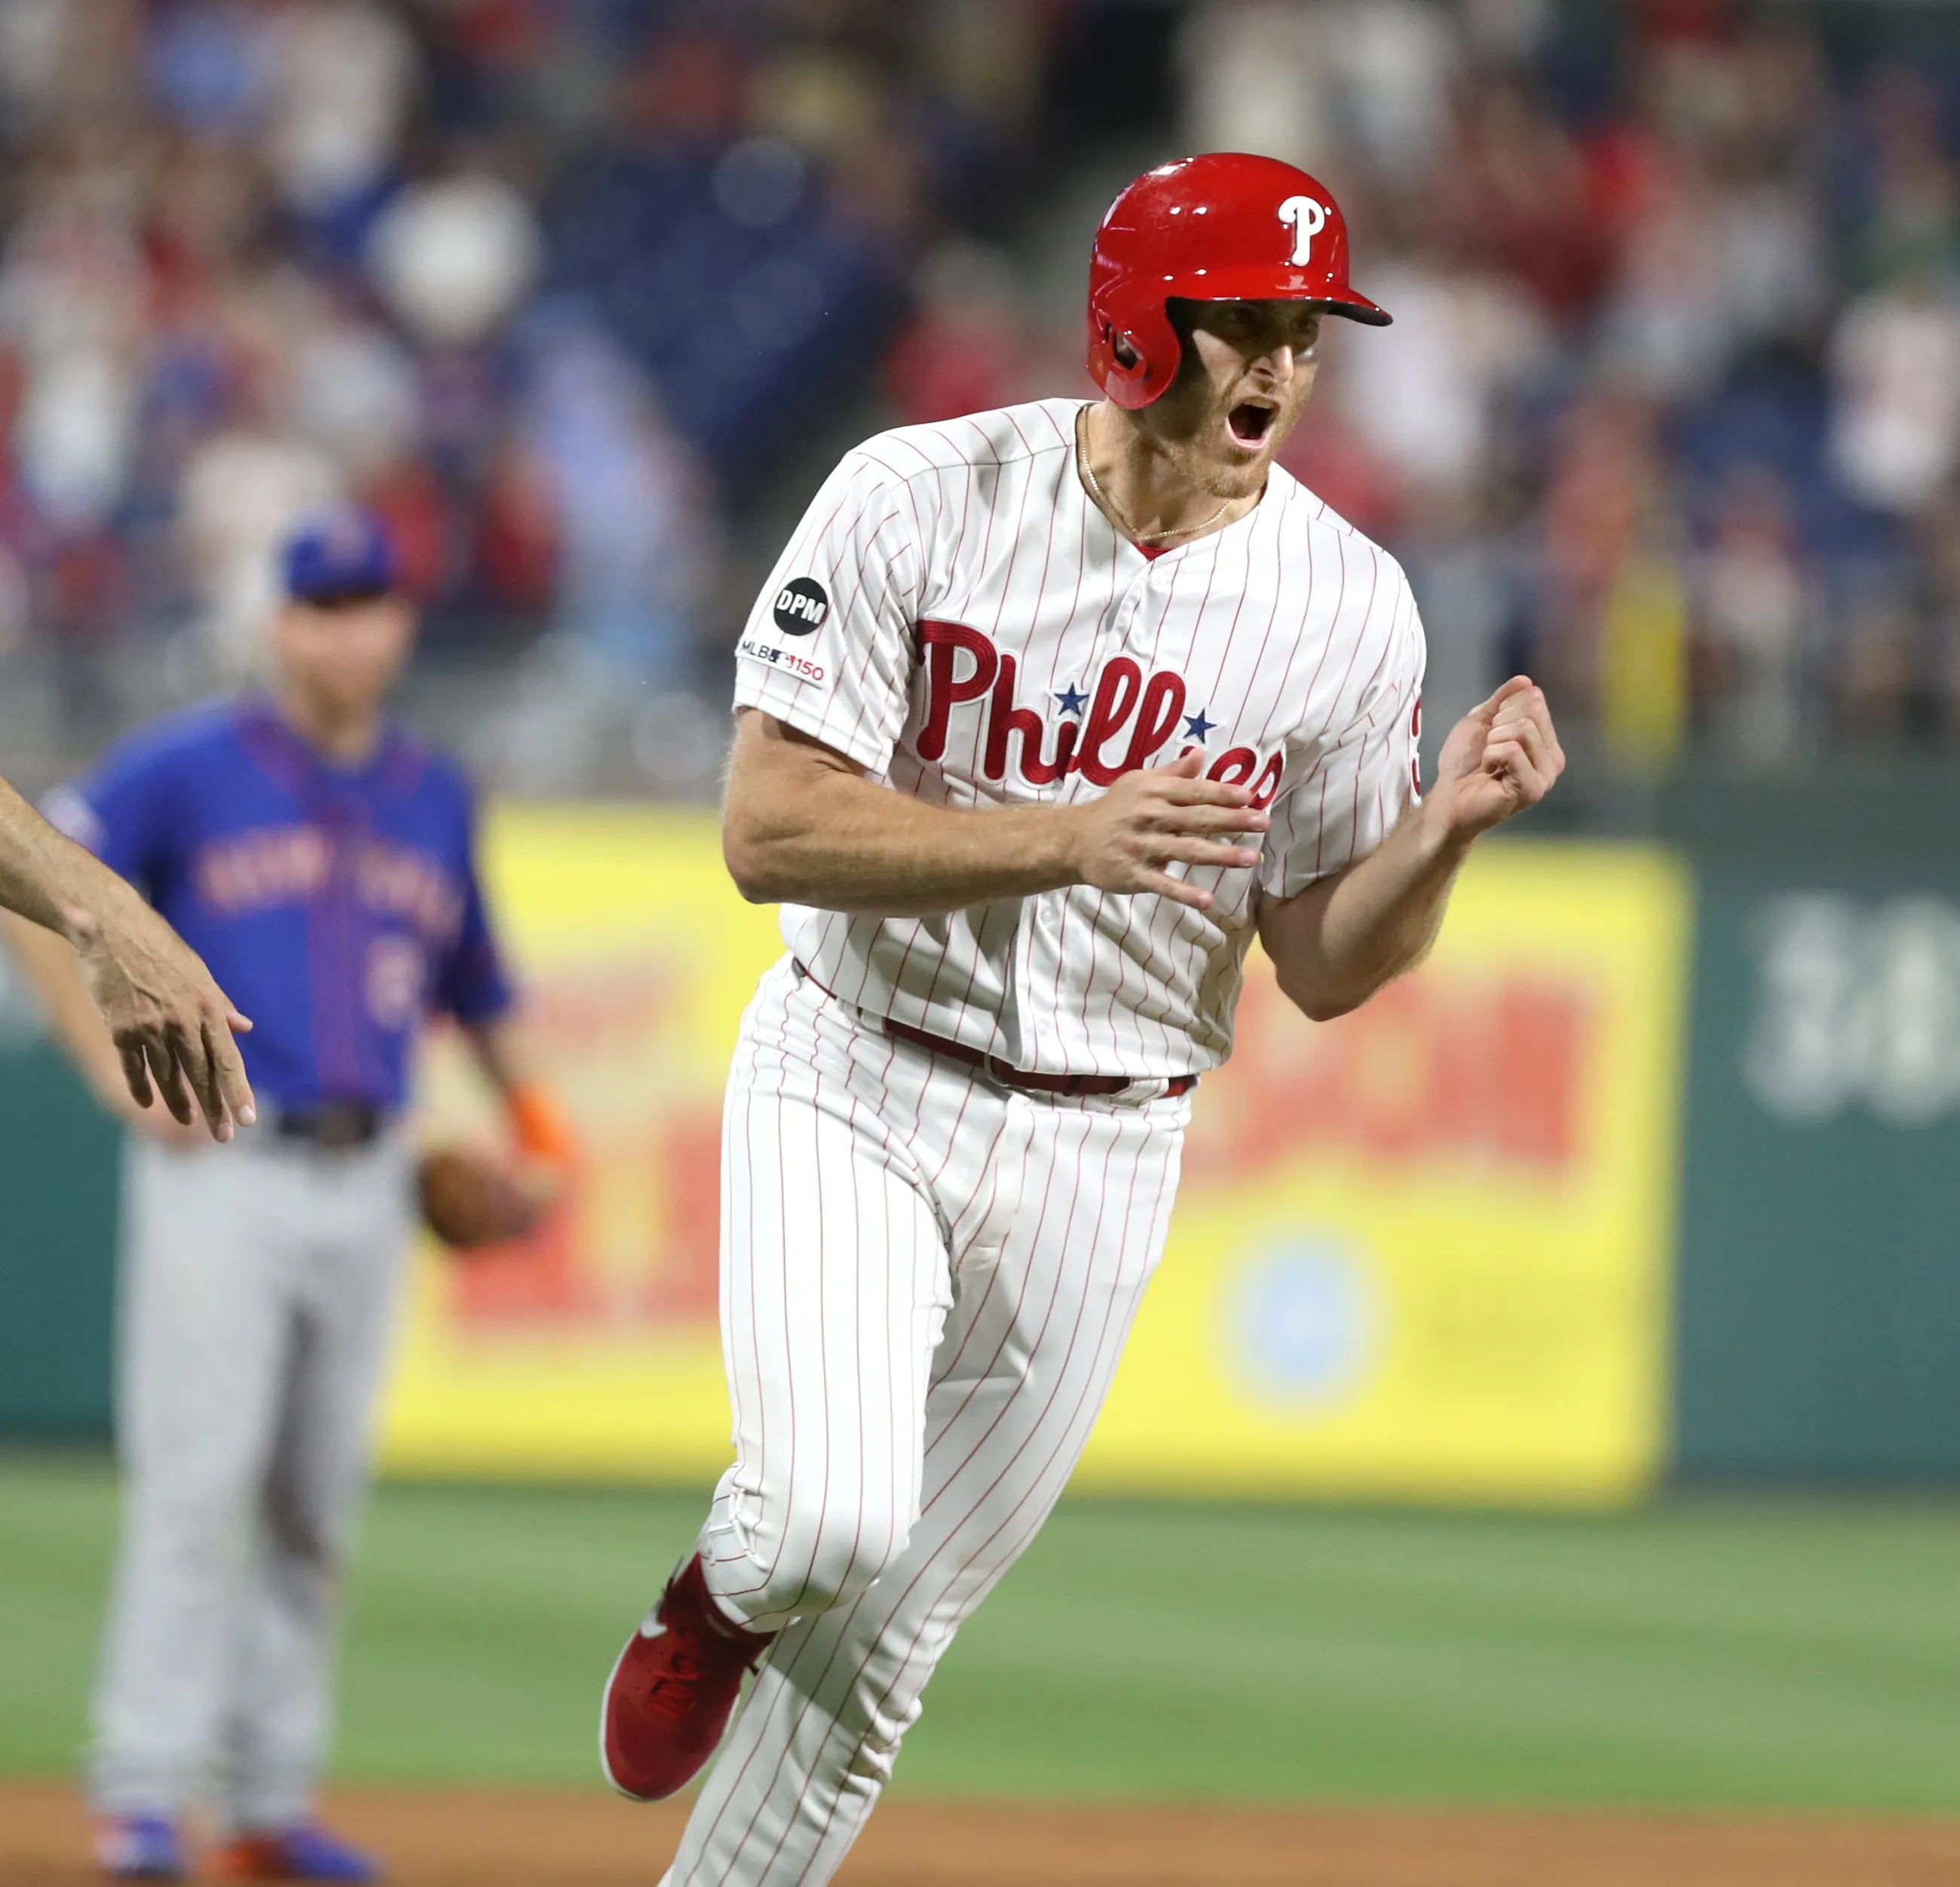 The Phillies lost seven straight games, so Brad Miller bought